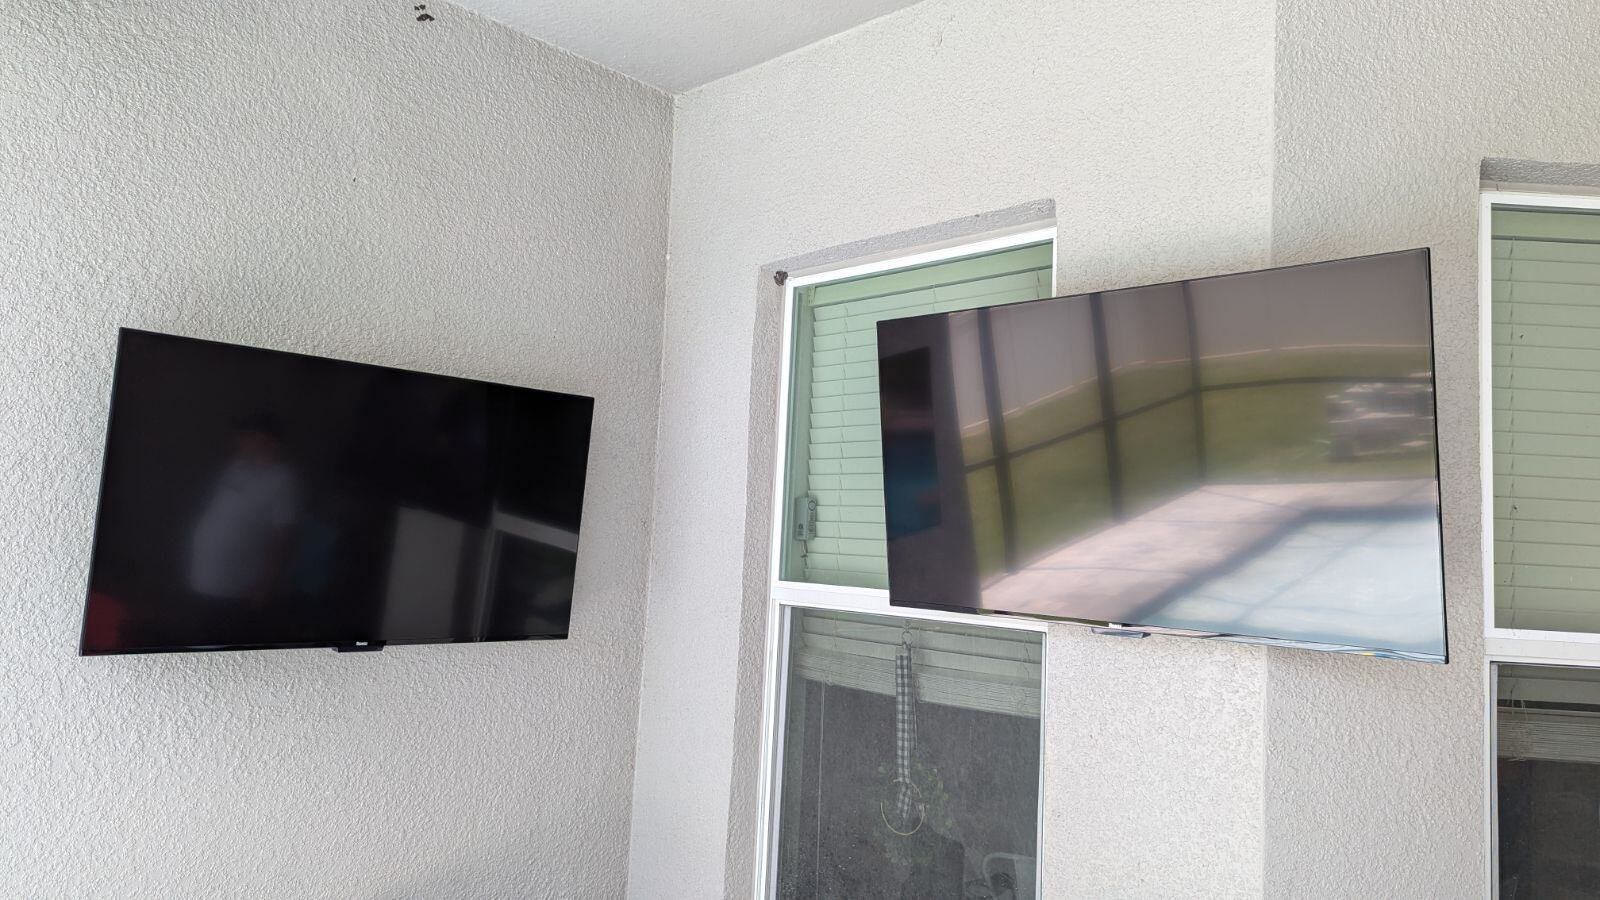 A flat screen tv is mounted on a wall above a entertainment center